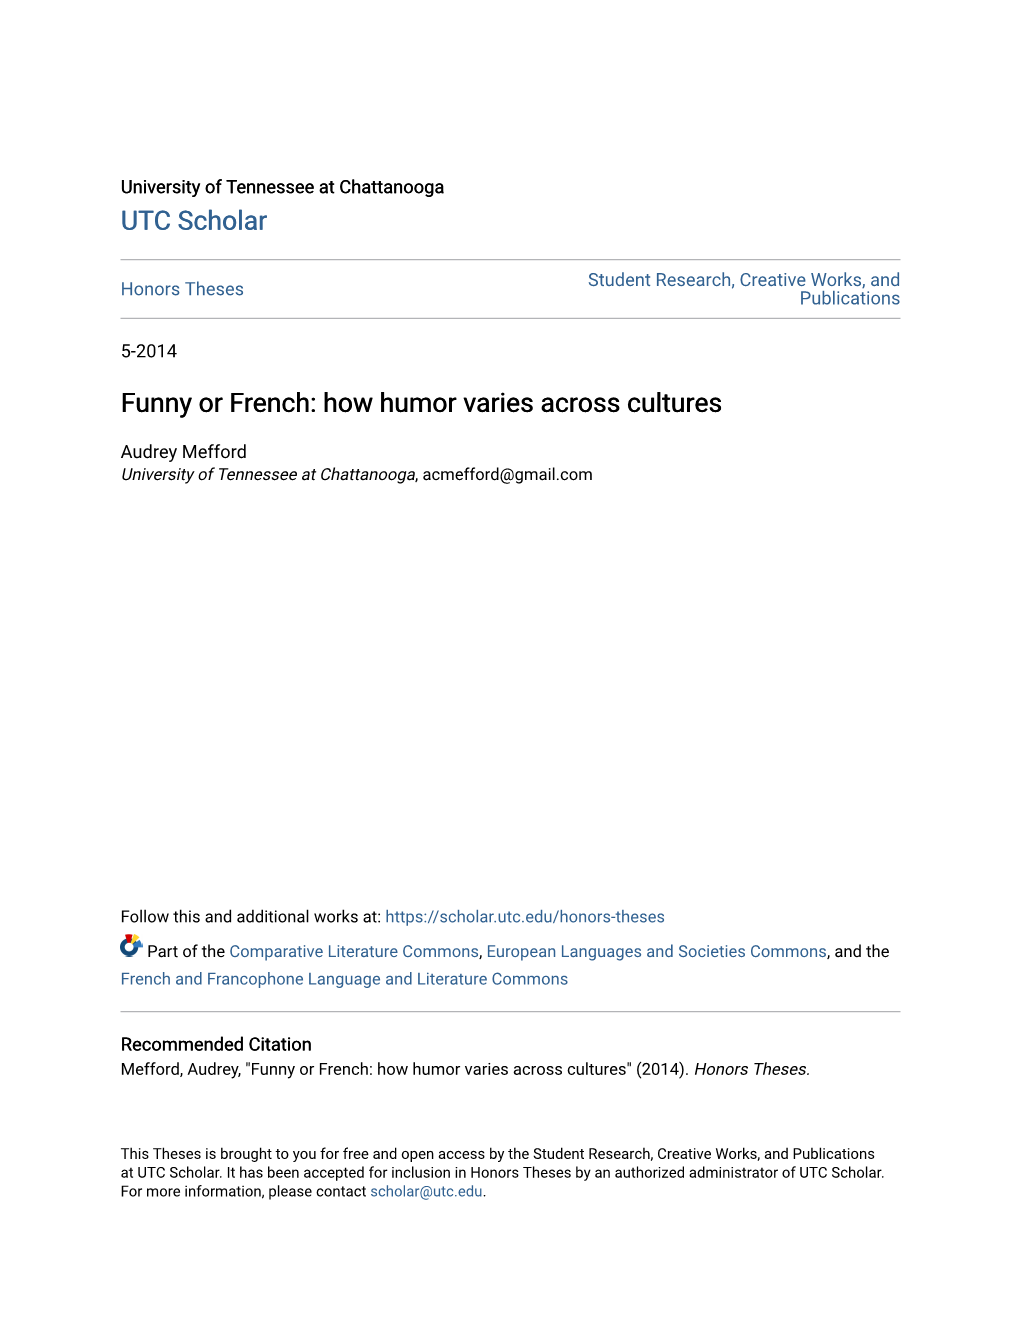 Funny Or French: How Humor Varies Across Cultures